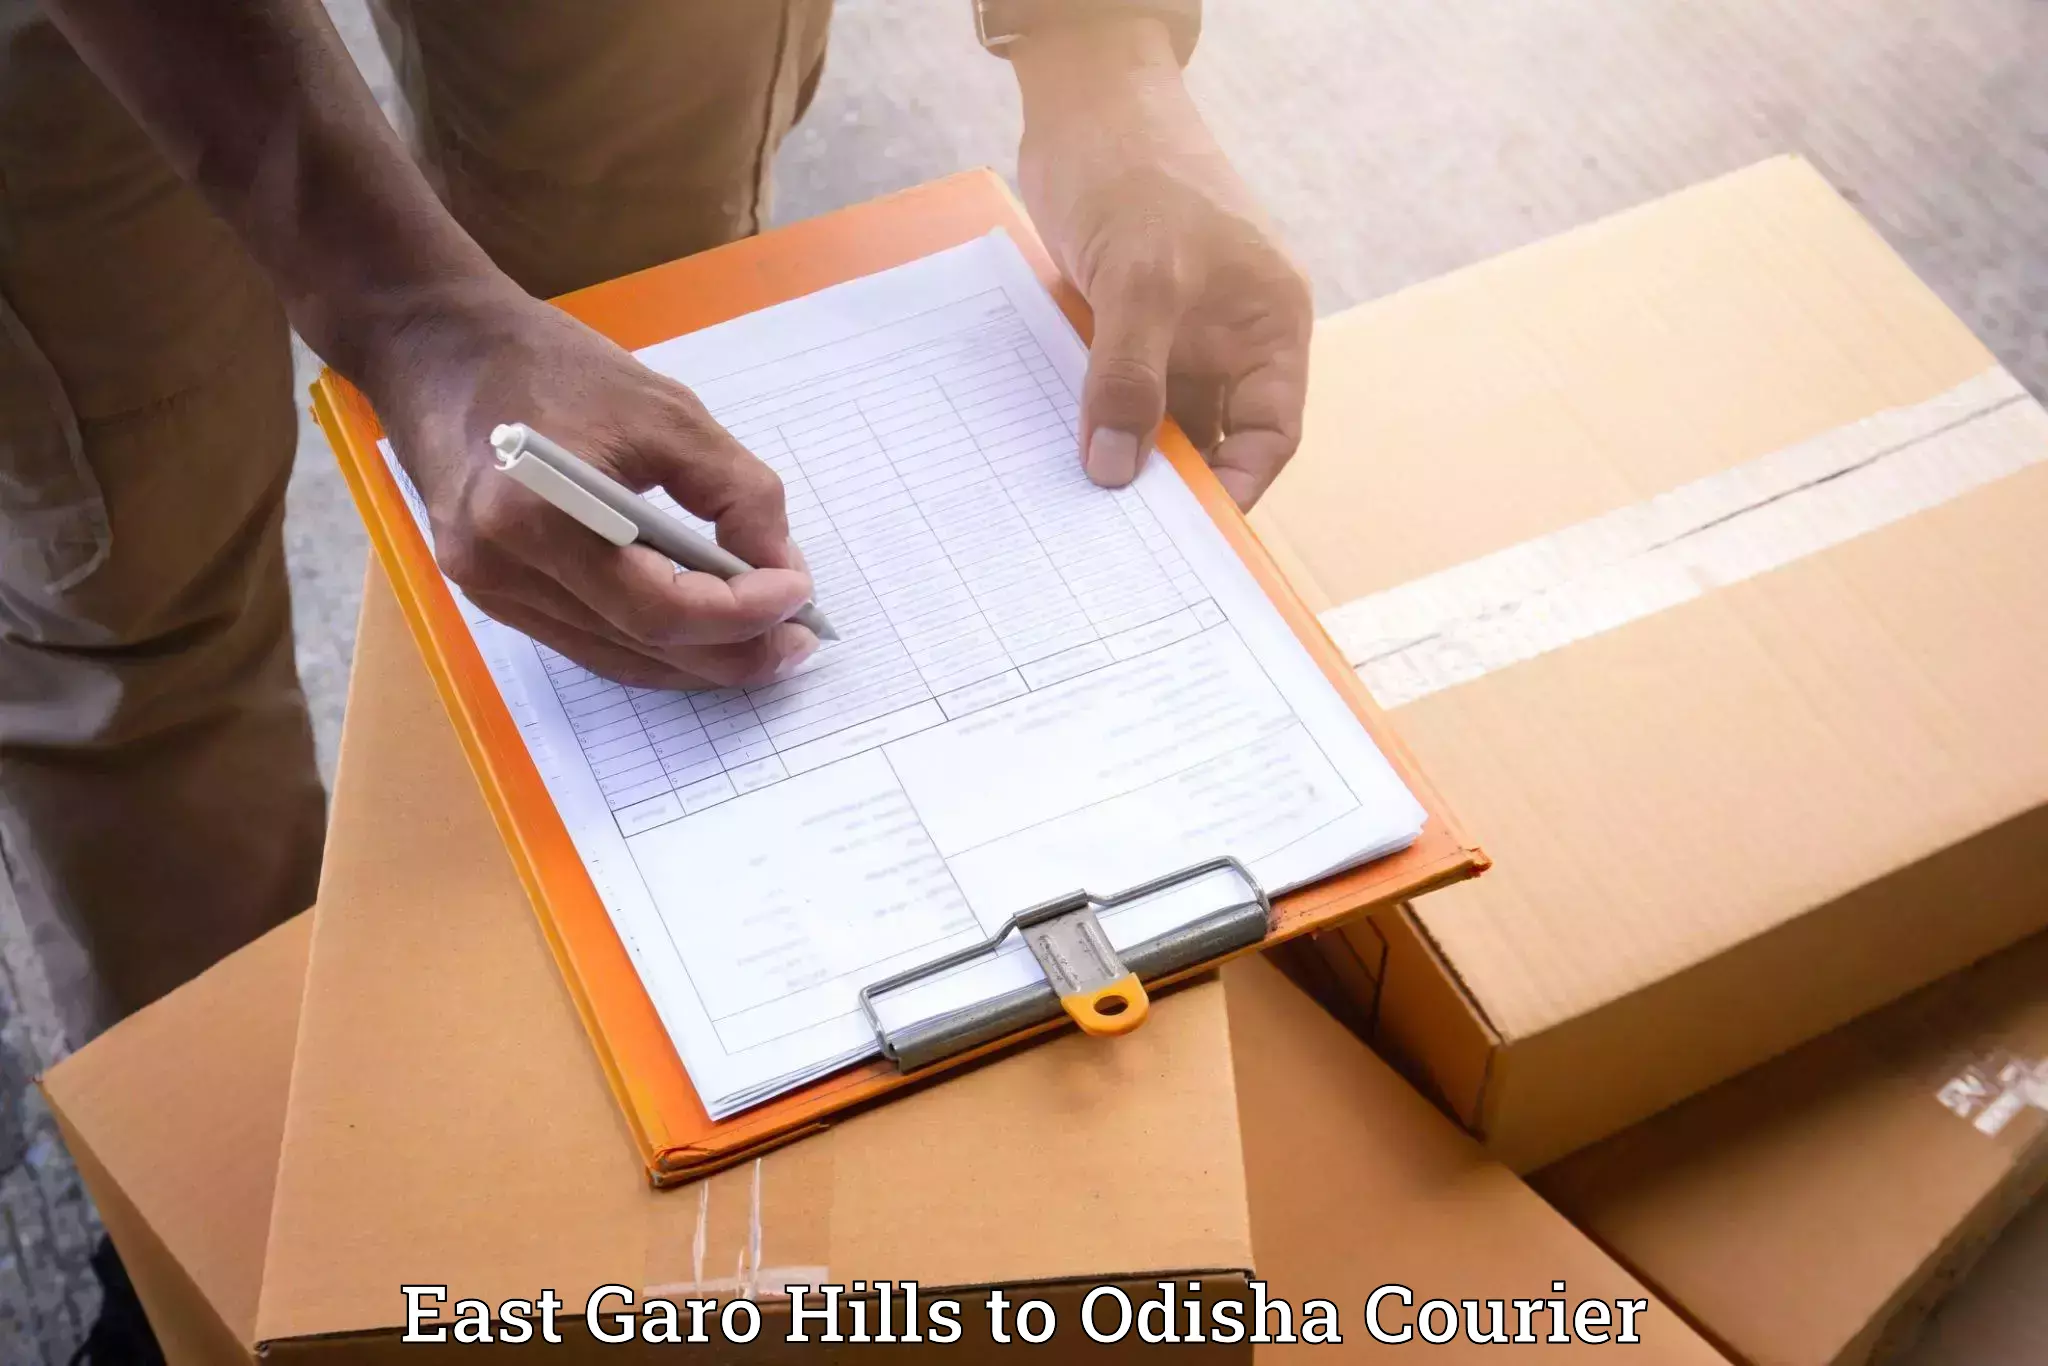 Quality furniture transport East Garo Hills to Aul